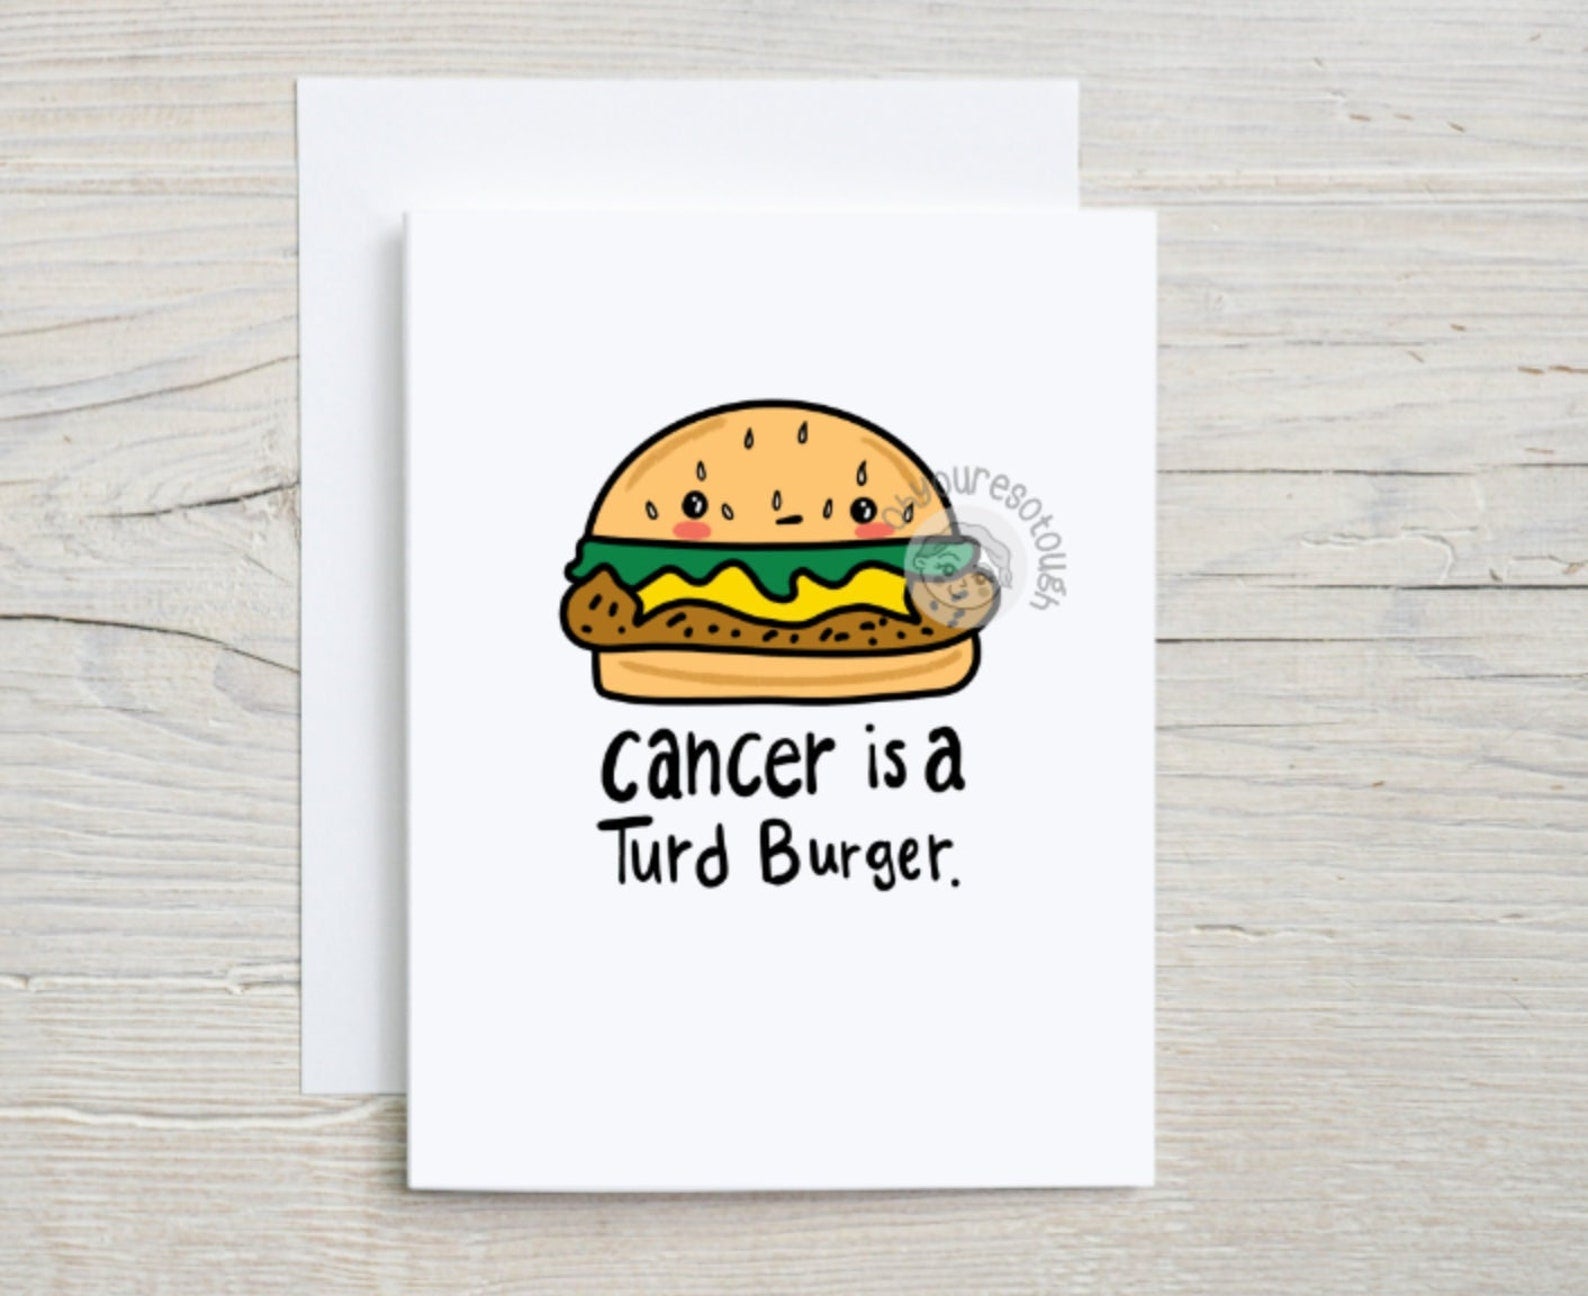 Cancer Greeting Card Funny - Cancer Turd Burger - Cancer Encouragement - Cancer Fighter - Chemo Gift - Cancer Card - Cancer Fighter Gift